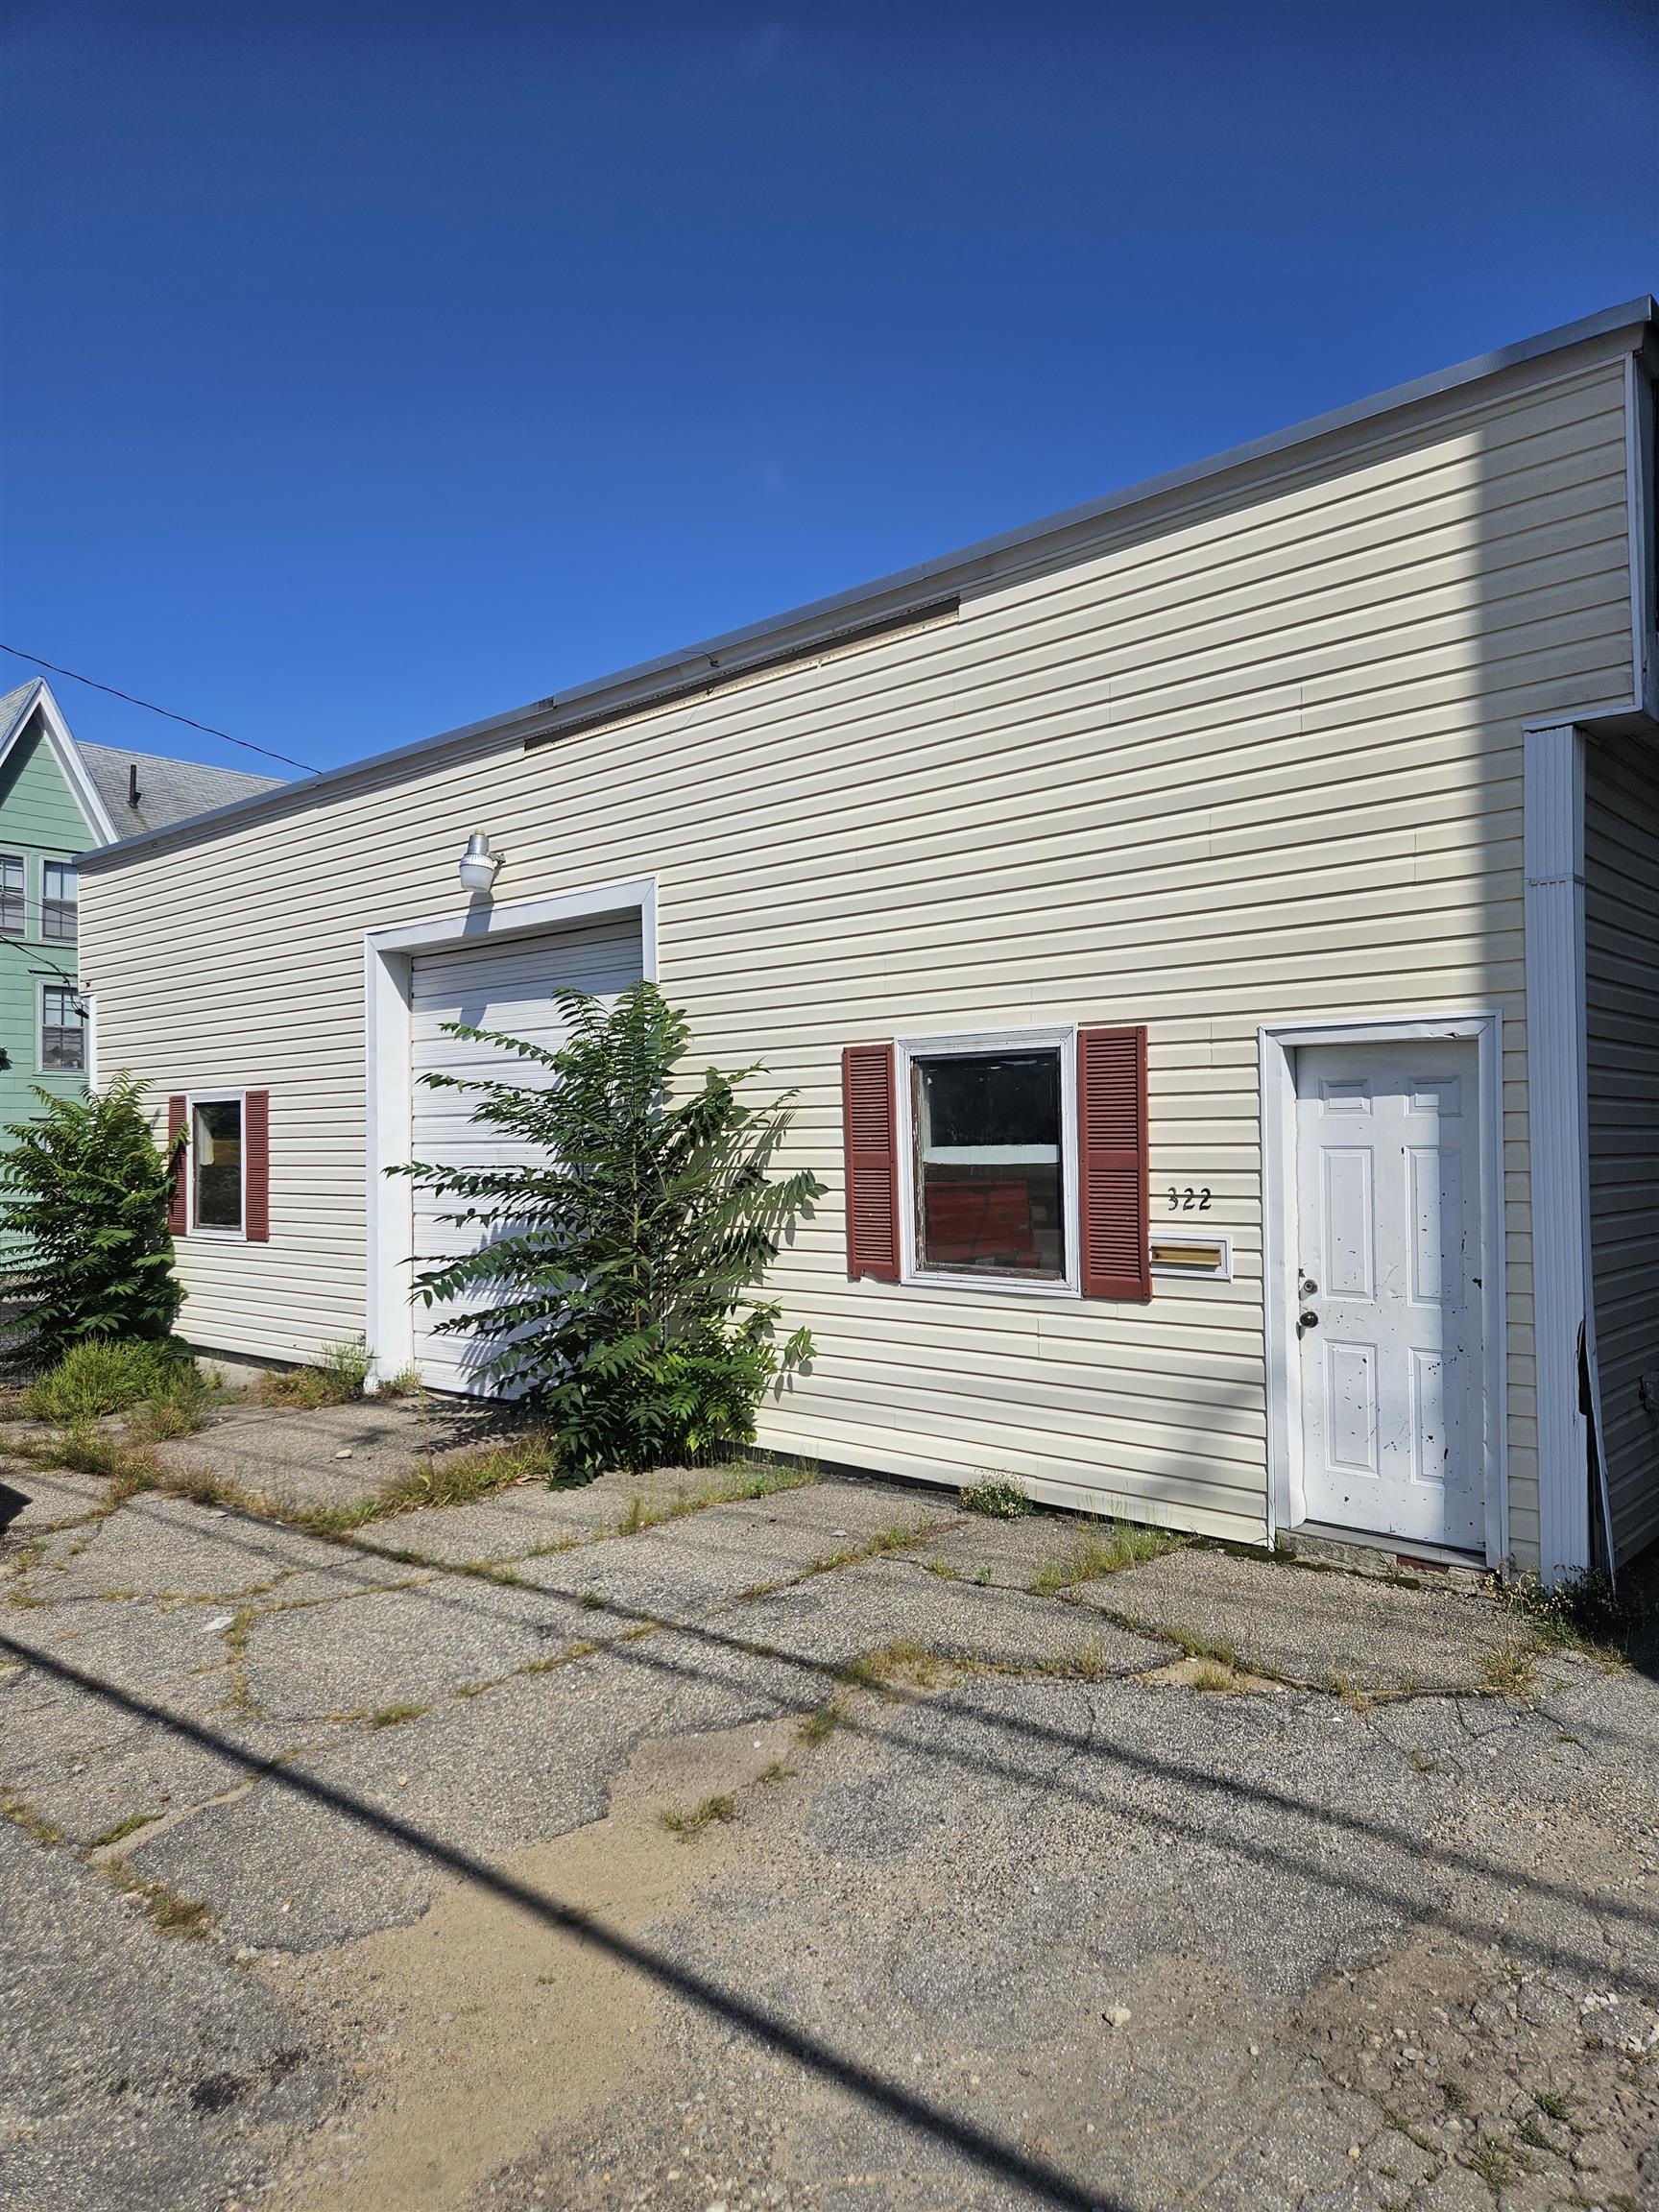 MANCHESTER NH Commercial Property for sale $$275,000 | $114 per sq.ft.